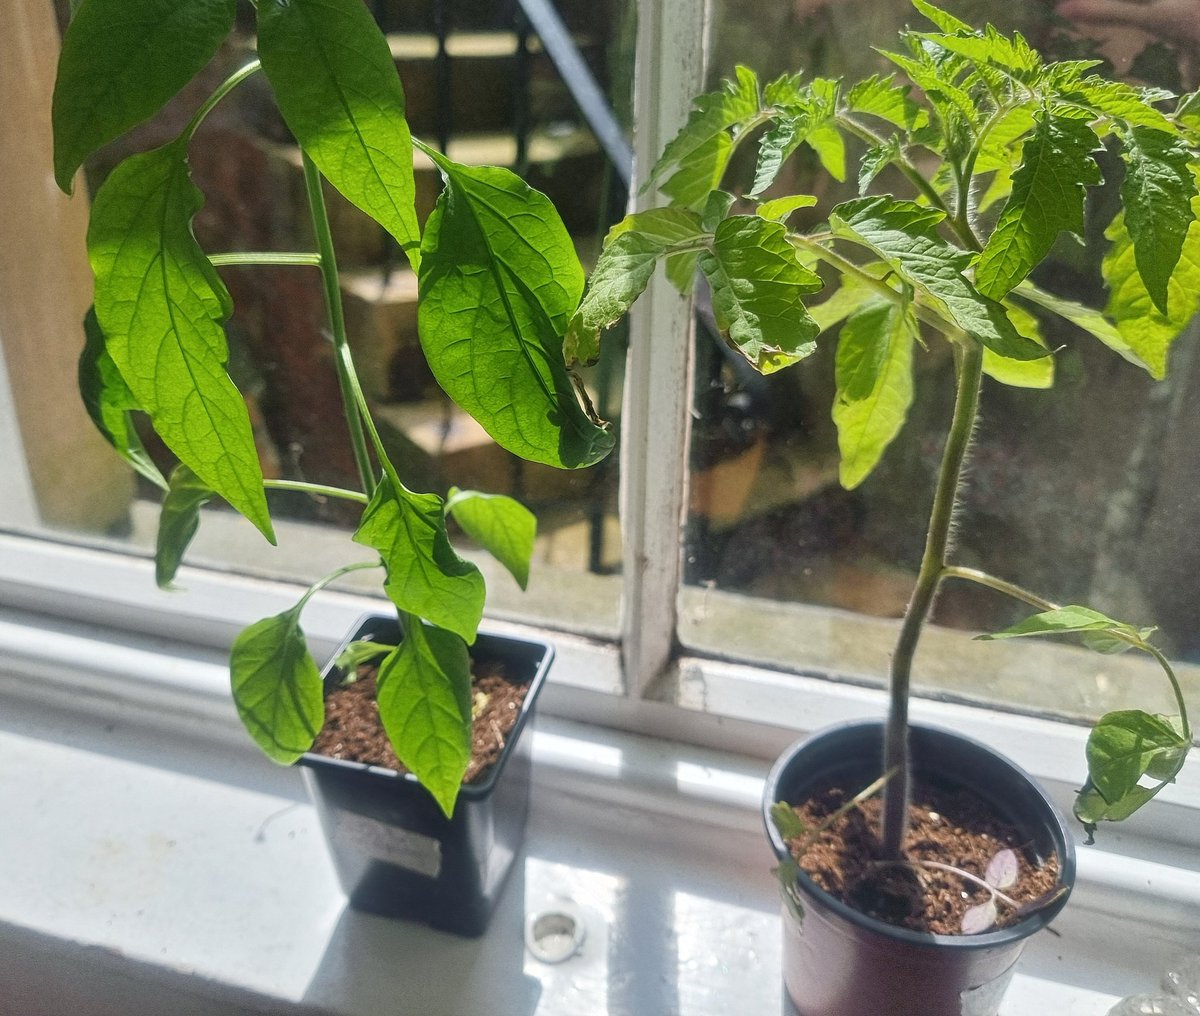 Did you go to the #plantswap at @oakwoodmarket today! One of our team swapped some rocket & salad veg seedlings for these tomato & chilli plants. Now soaking up the sunshine a ka windowsill! Fancy picking up free plug plants? Stay tuned. #Leeds #GetGrowingLeeds